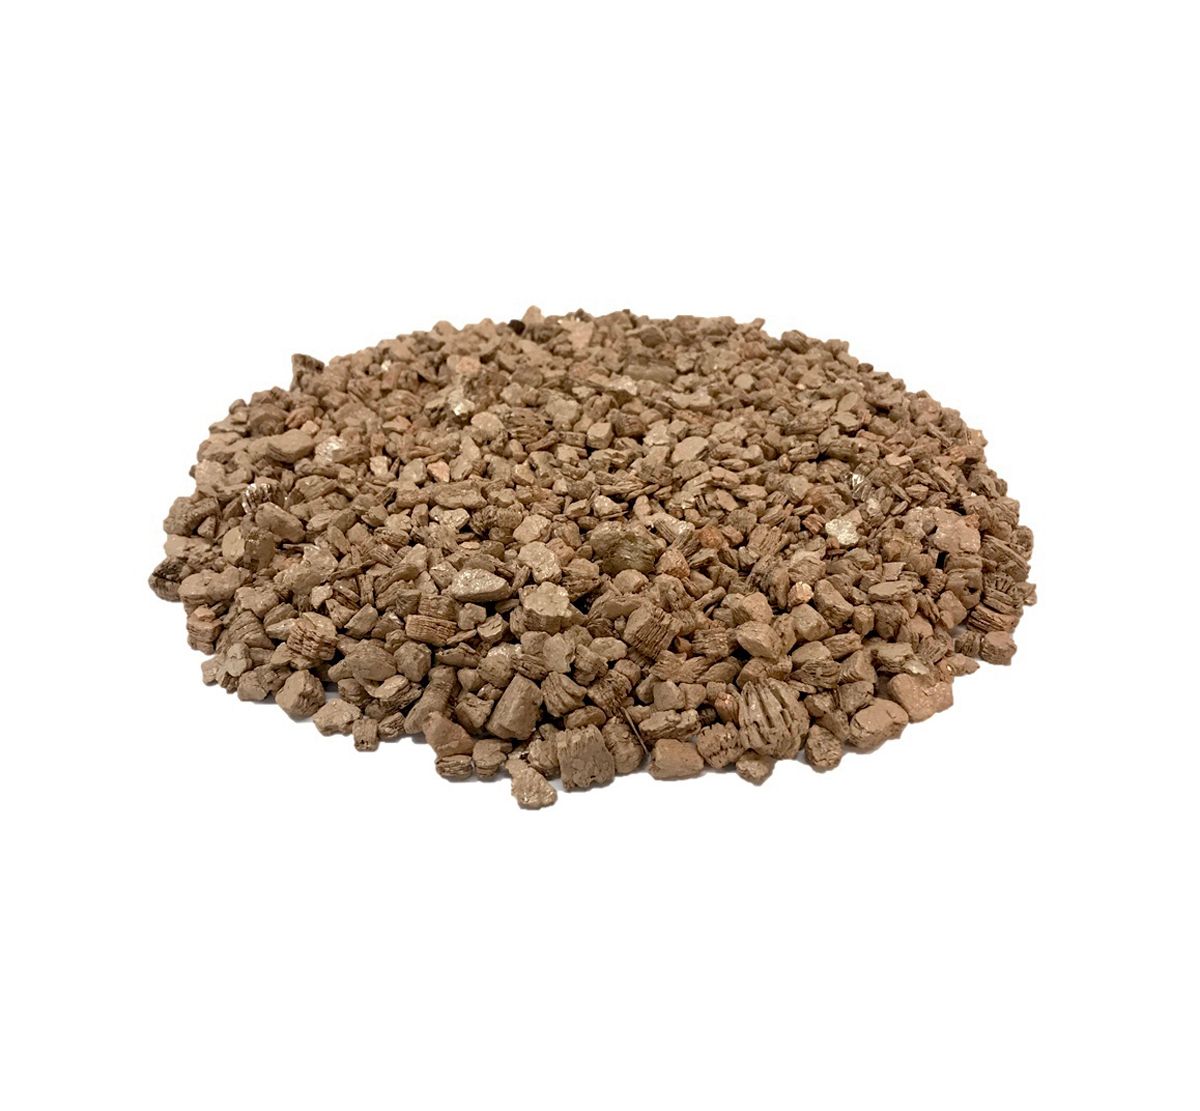 Enhance A Fire 12 Oz. Adriatic Sea Designer Vermiculite for Indoor Vented Gas Logs and Fireplace